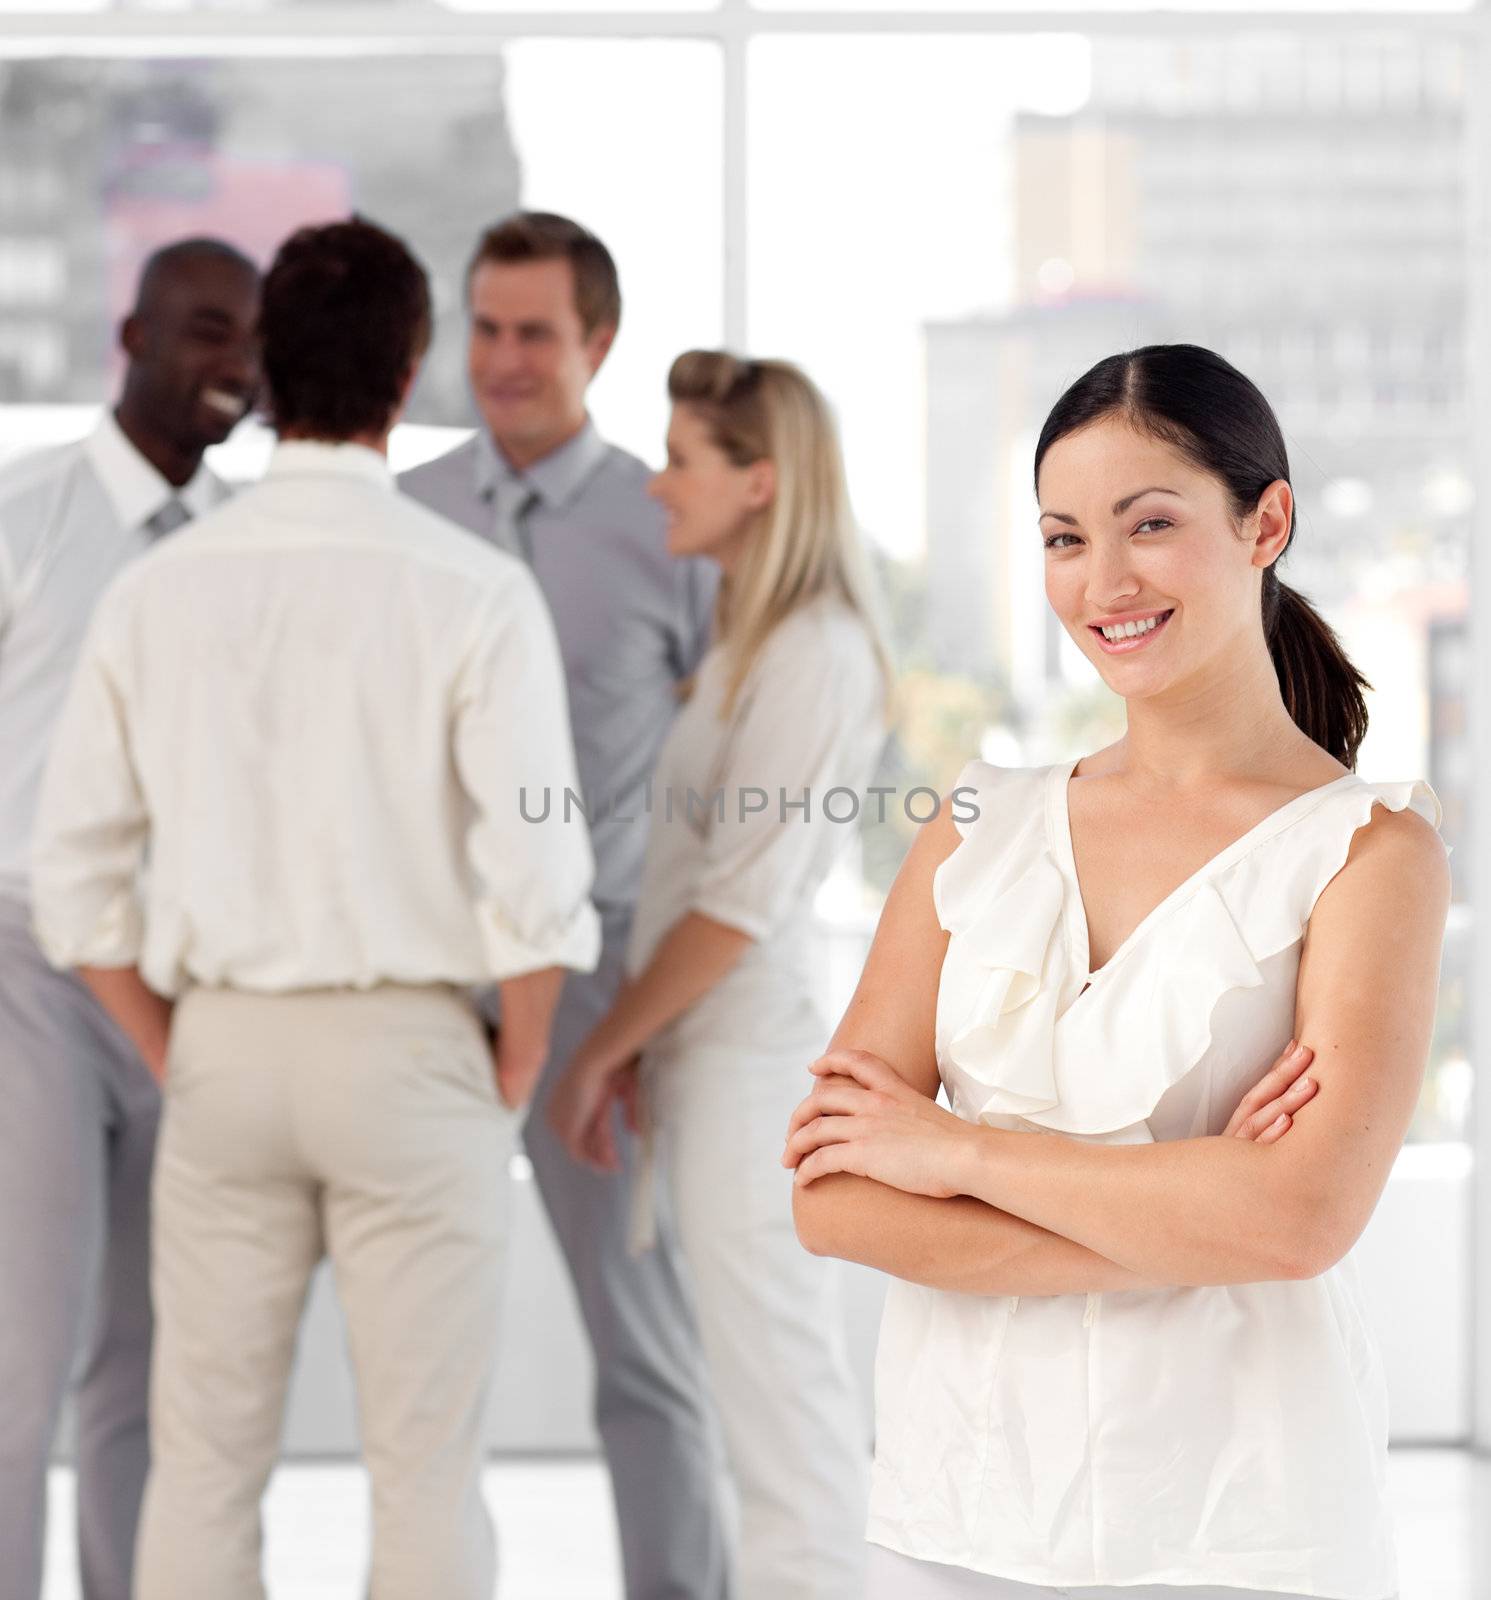 Diverse people talking together at work in a office